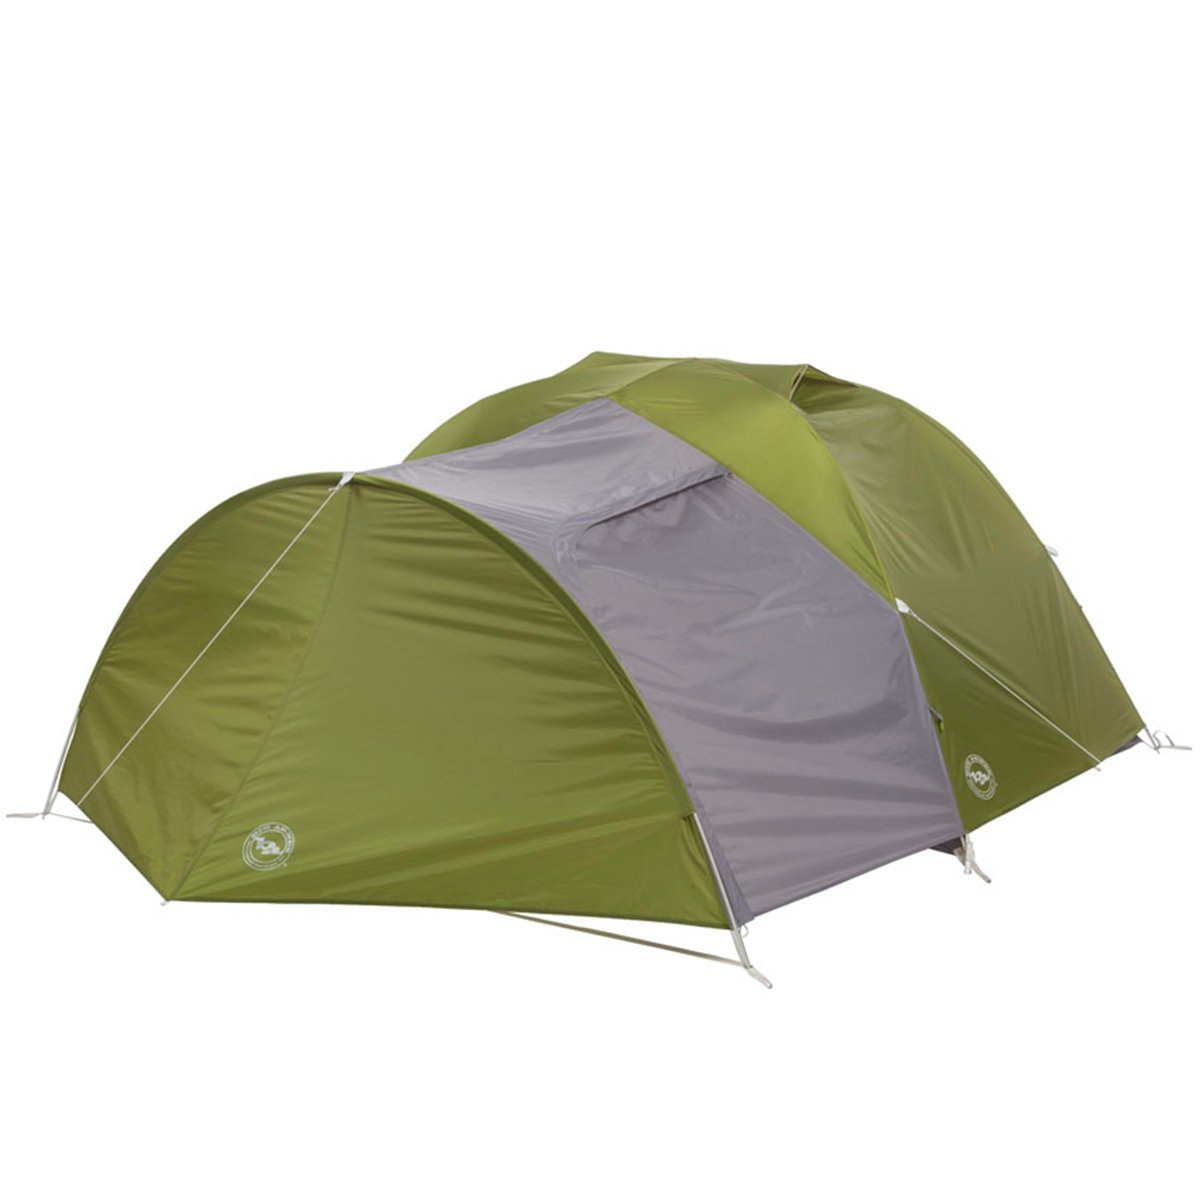 Big Agnes Blacktail 2 Person Hotel Tent in Big Agnes Blacktail 2 Hotel Tent by Big Agnes | Camping - goHUNT Shop by GOHUNT | Big Agnes - GOHUNT Shop